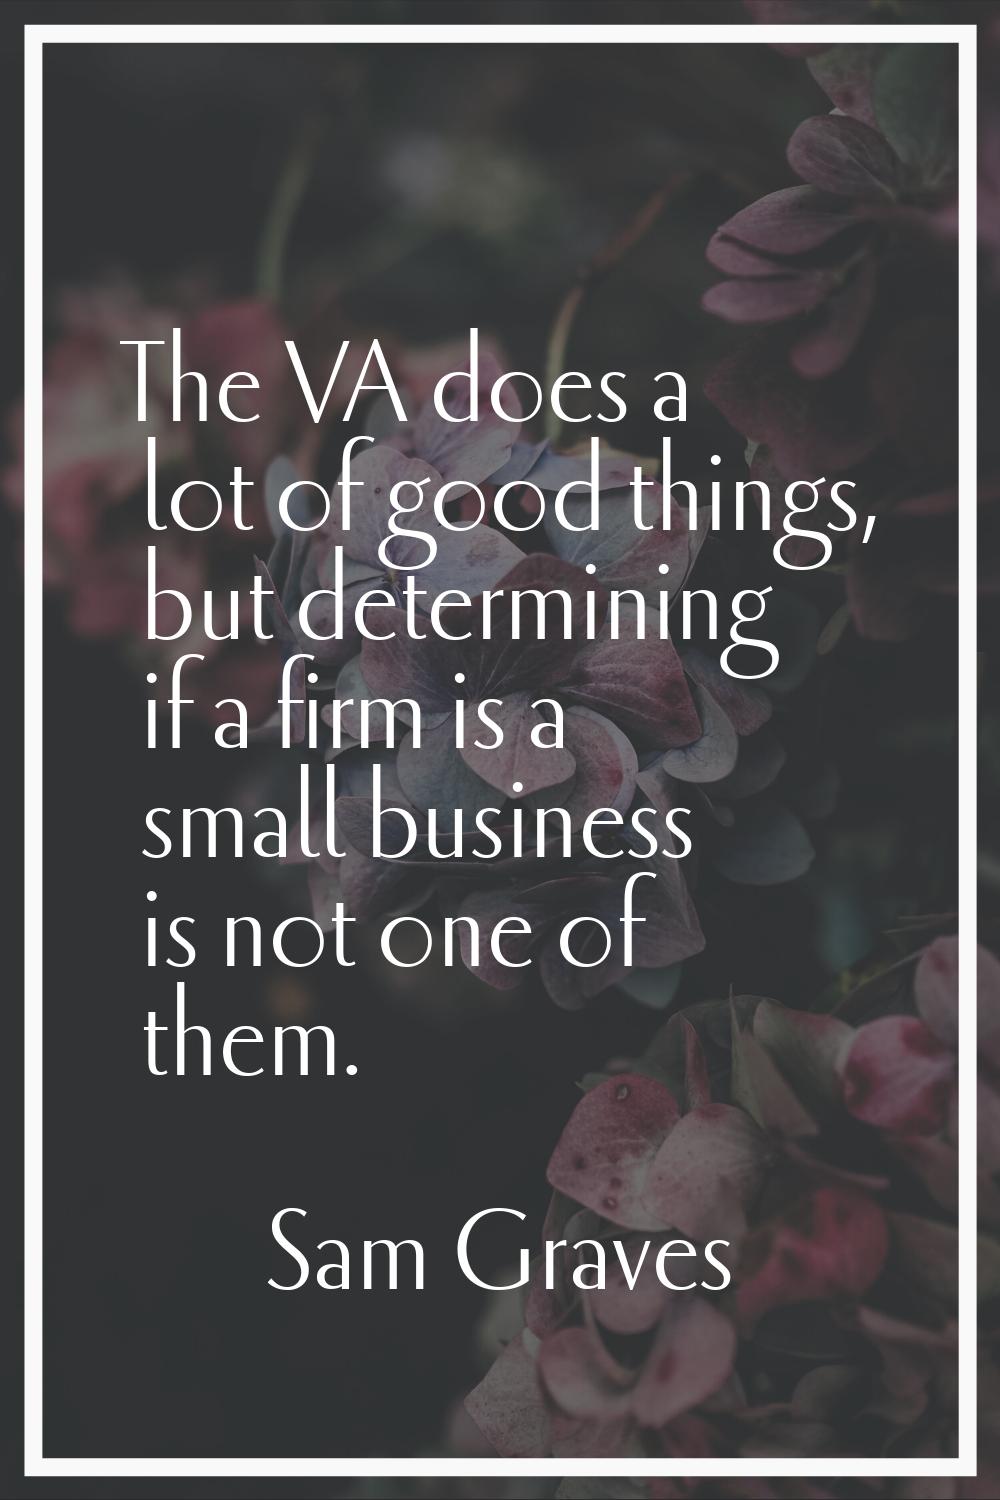 The VA does a lot of good things, but determining if a firm is a small business is not one of them.